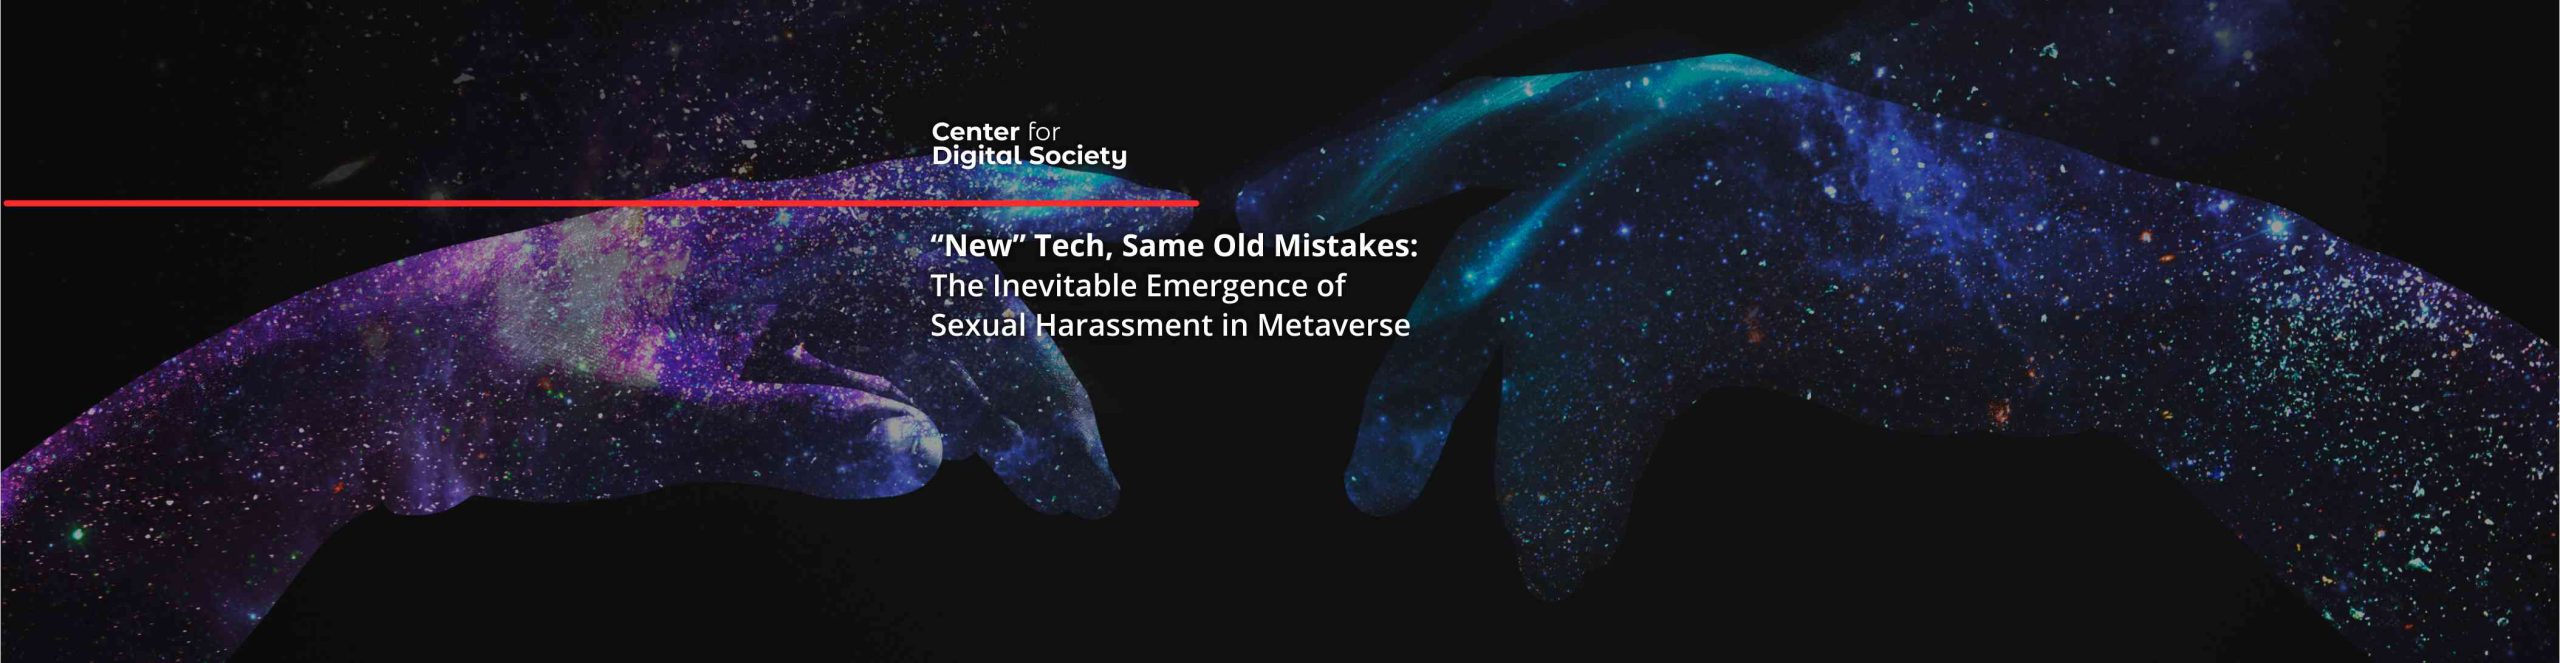 “New” Tech, Same Old Mistakes: The Inevitable Emergence of Sexual Harassment in Metaverse